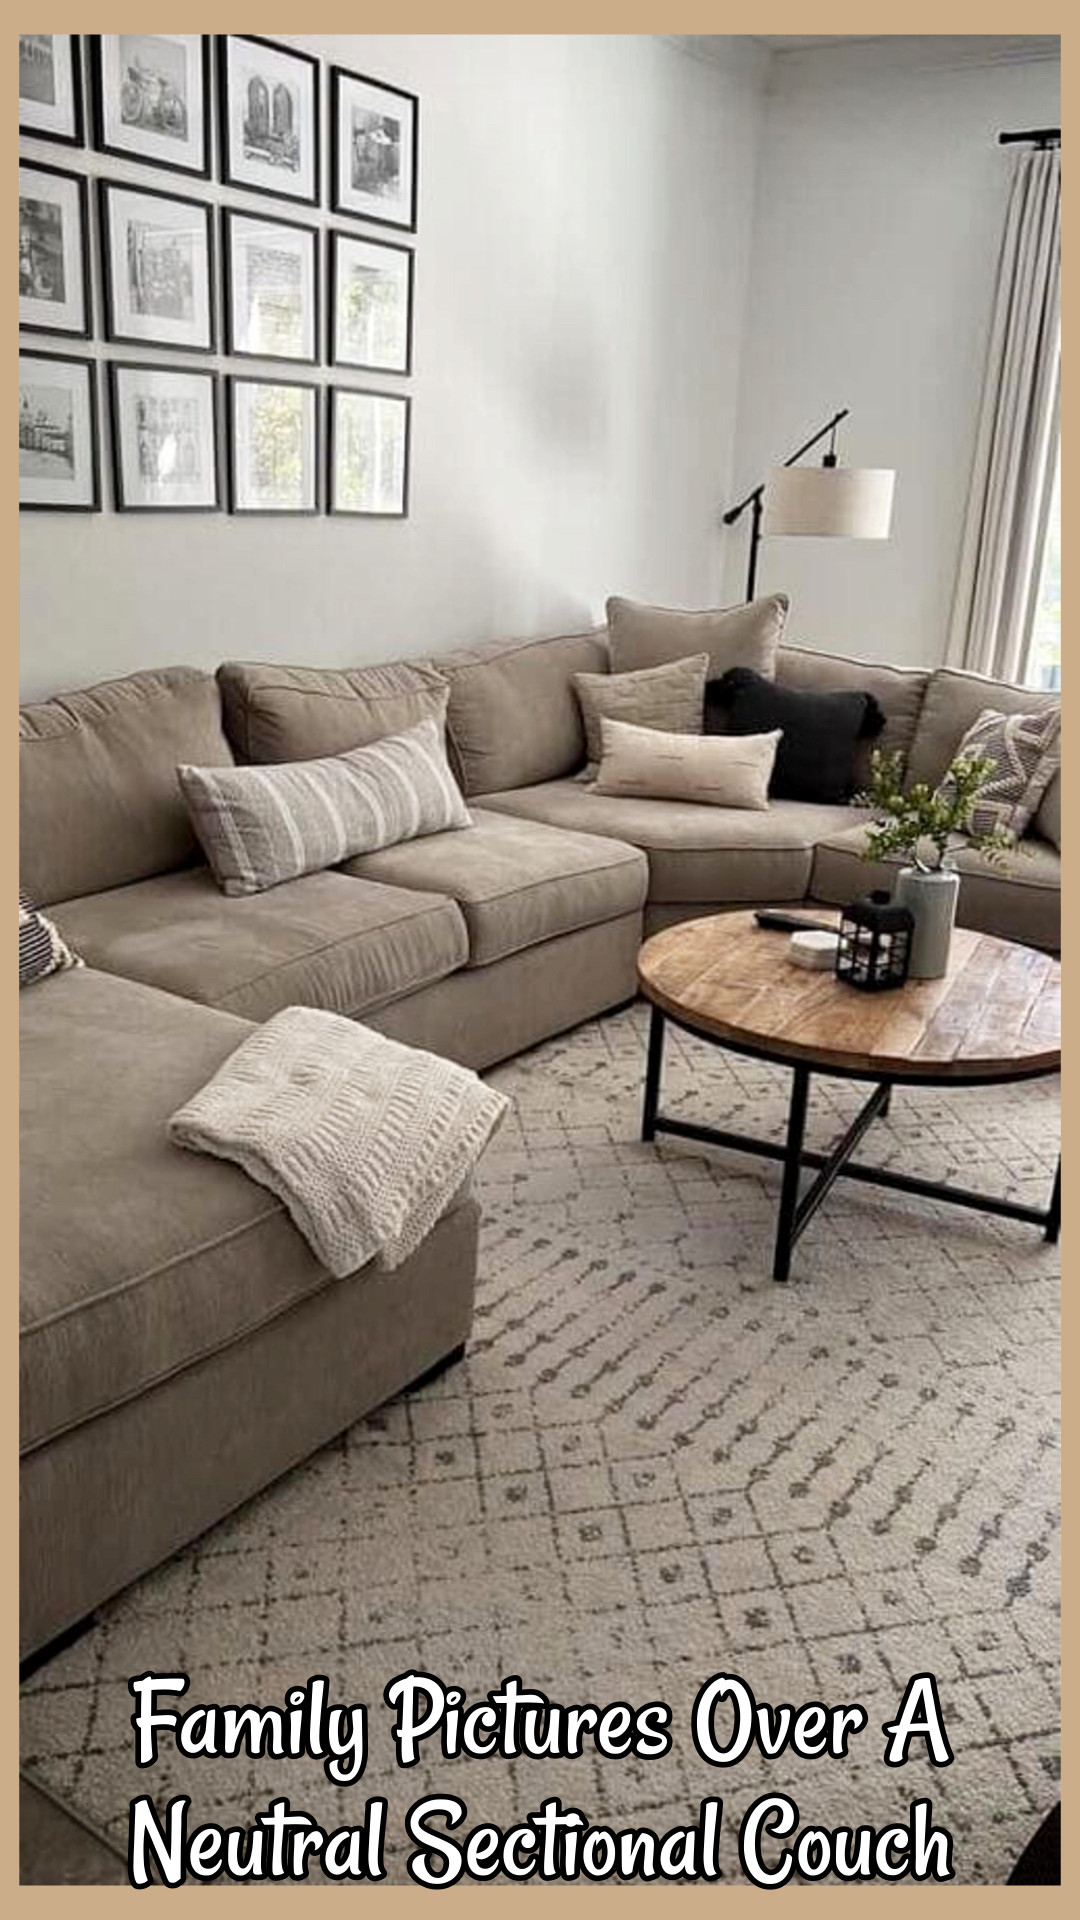 Family picture over neutral sectional couch for displaying  hanging photos on walls